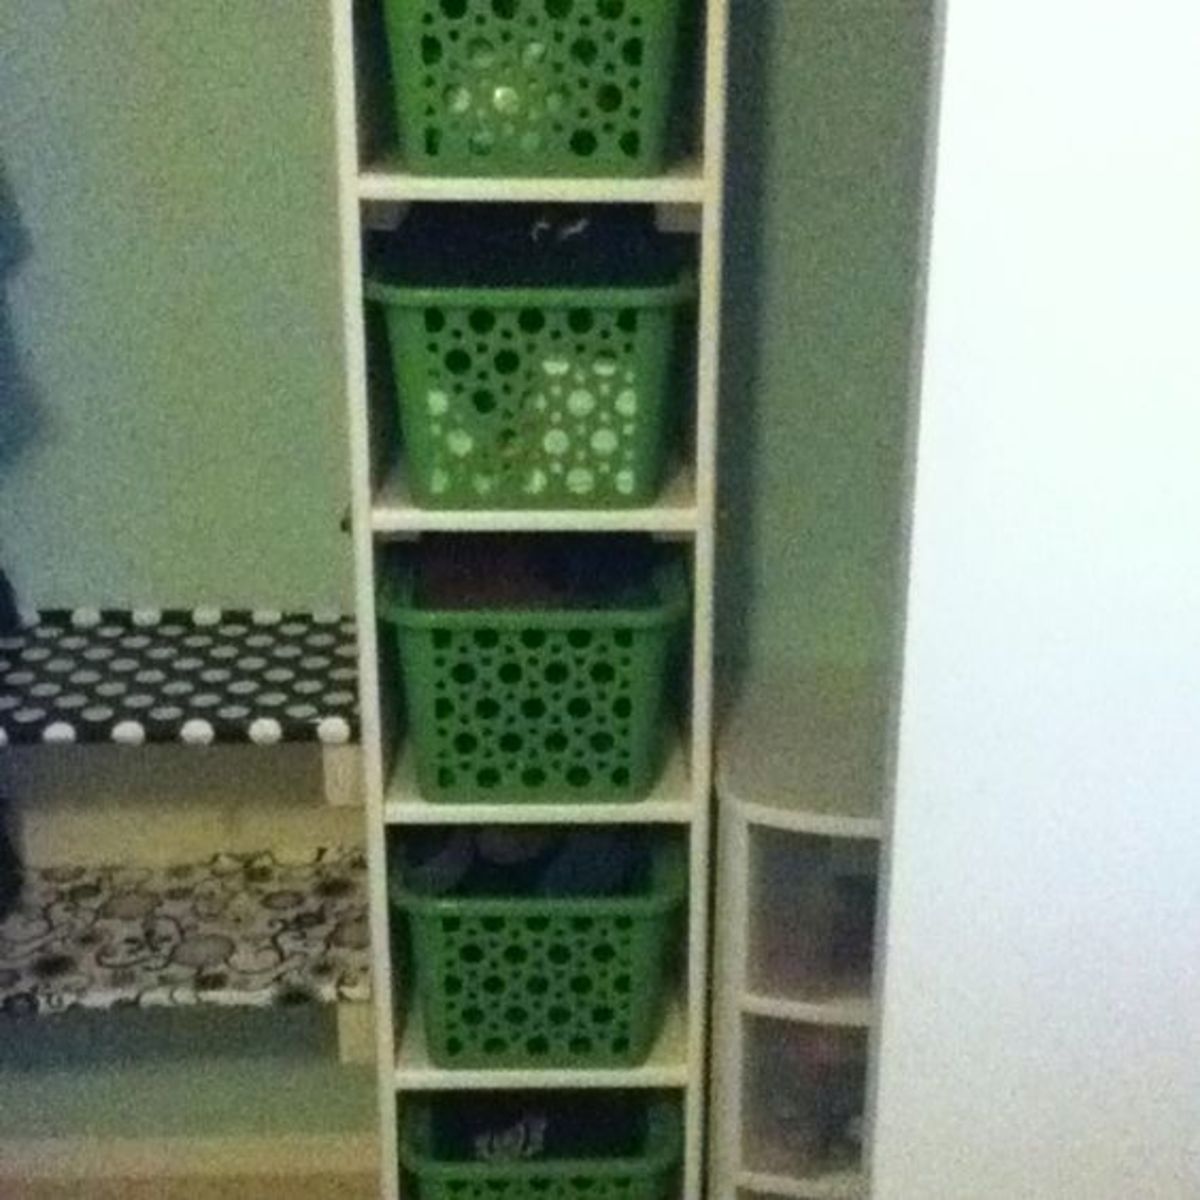 Organized closet! Dollar tree baskets for shoes and hats.